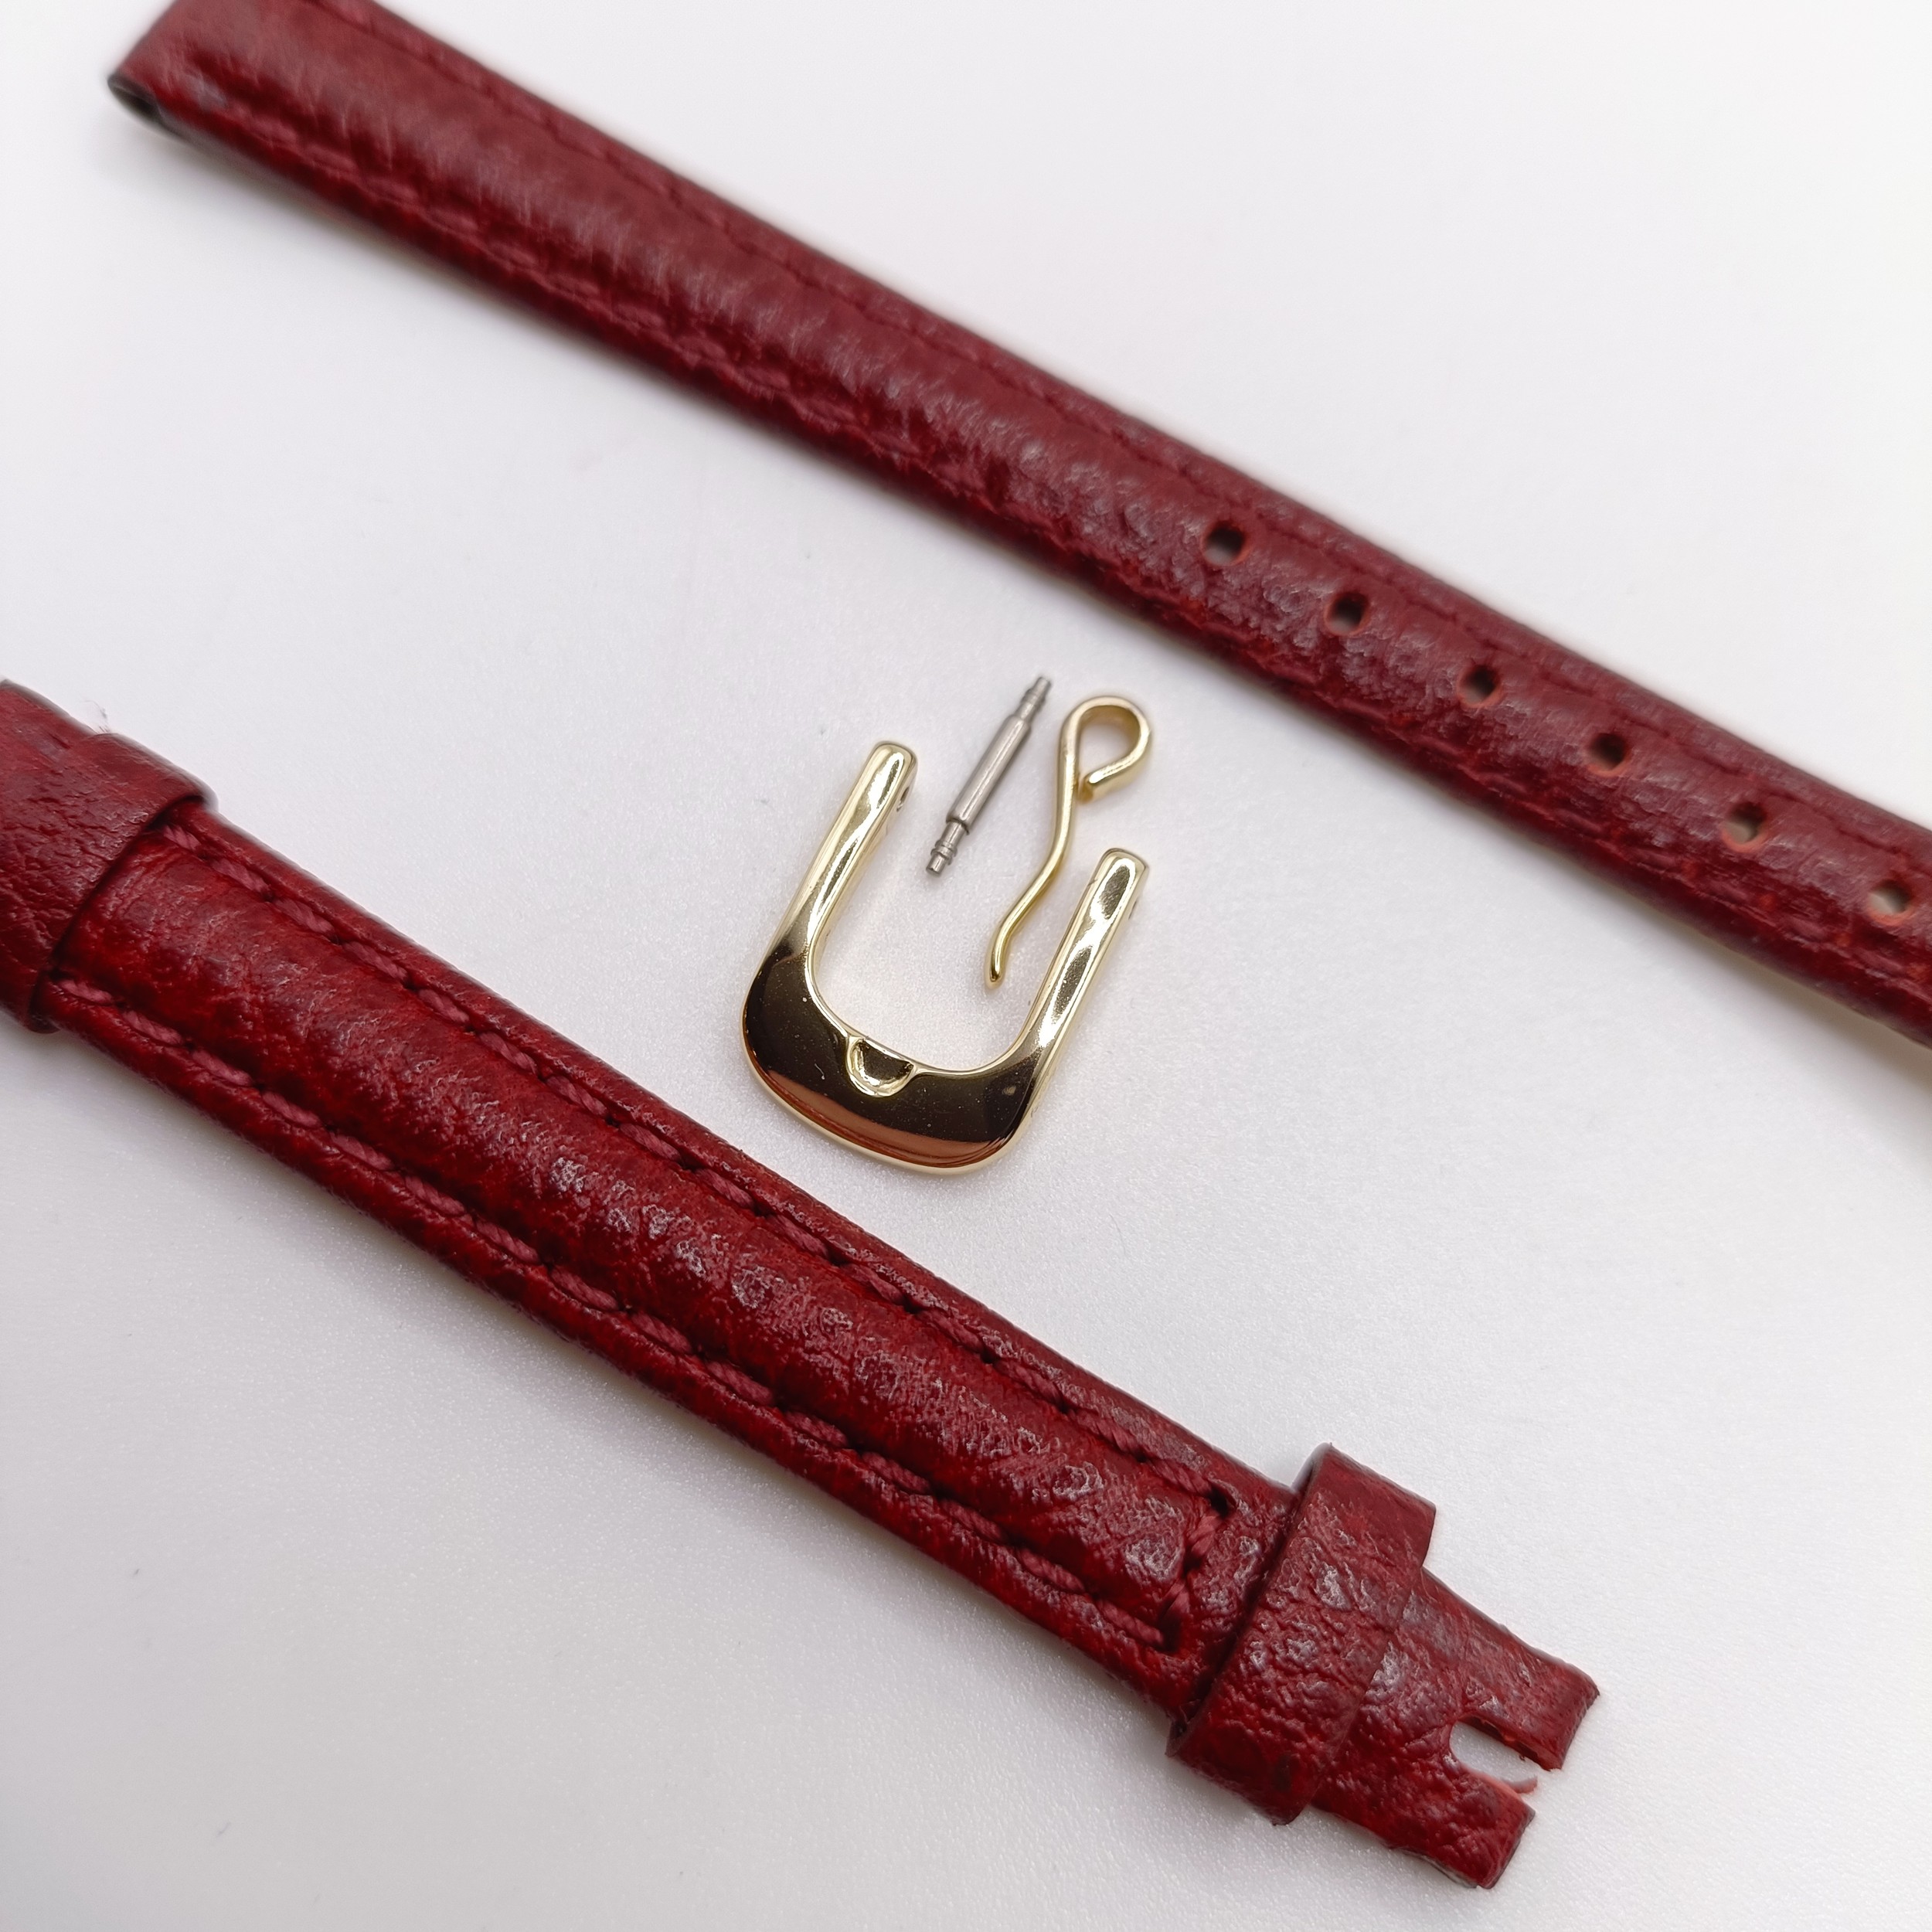 A brown/red leather watch strap, with a fastener, lug width 10mm - Image 4 of 5